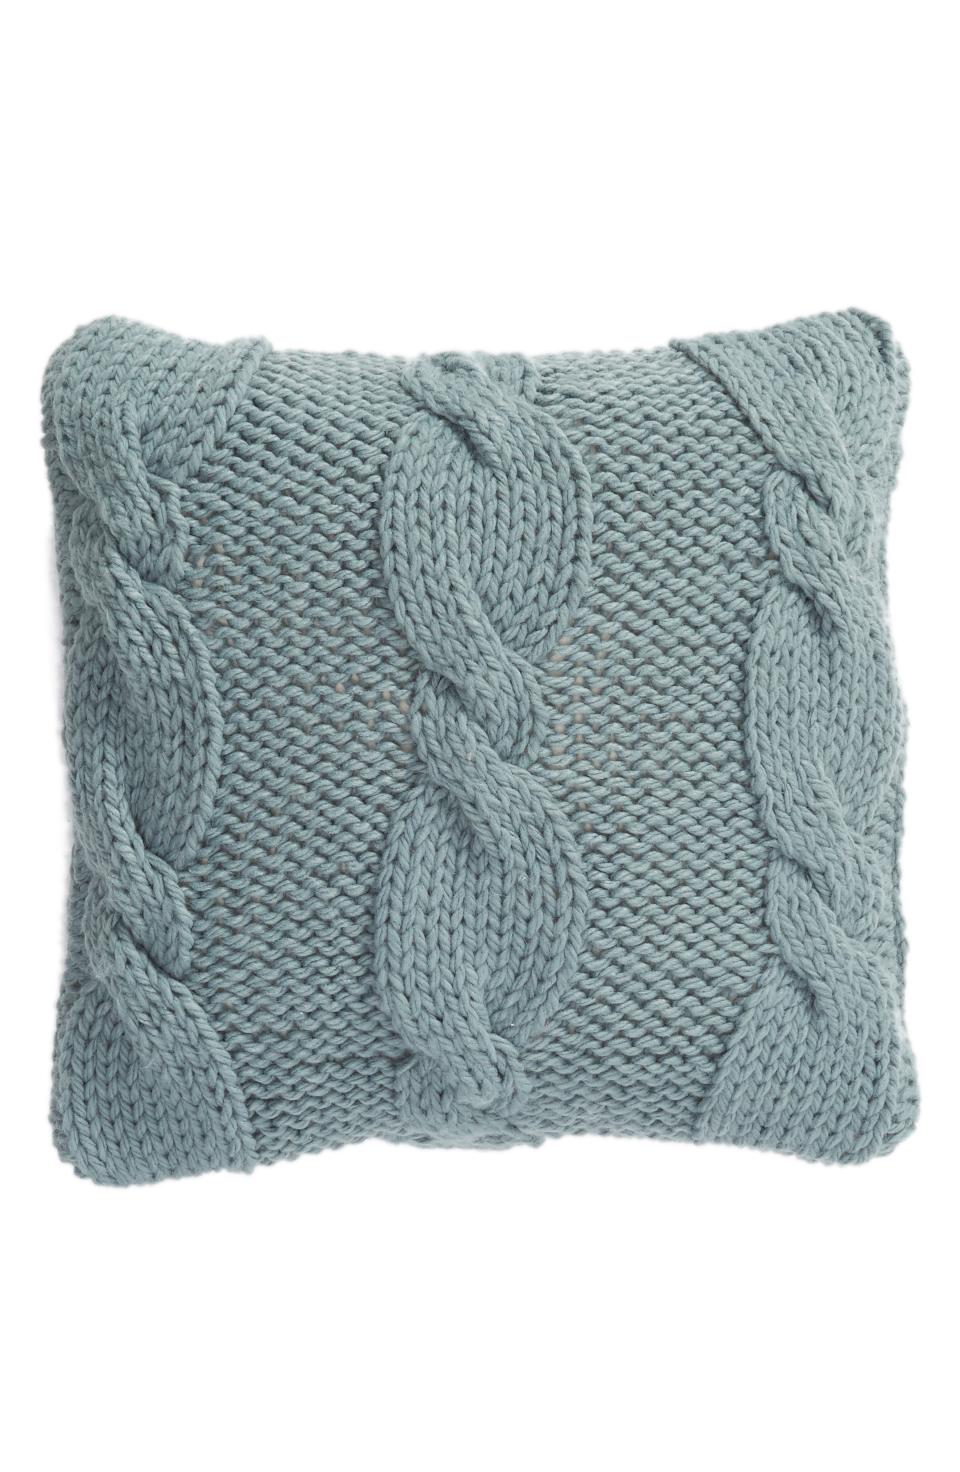 8) Cable Knit Accent Pillow